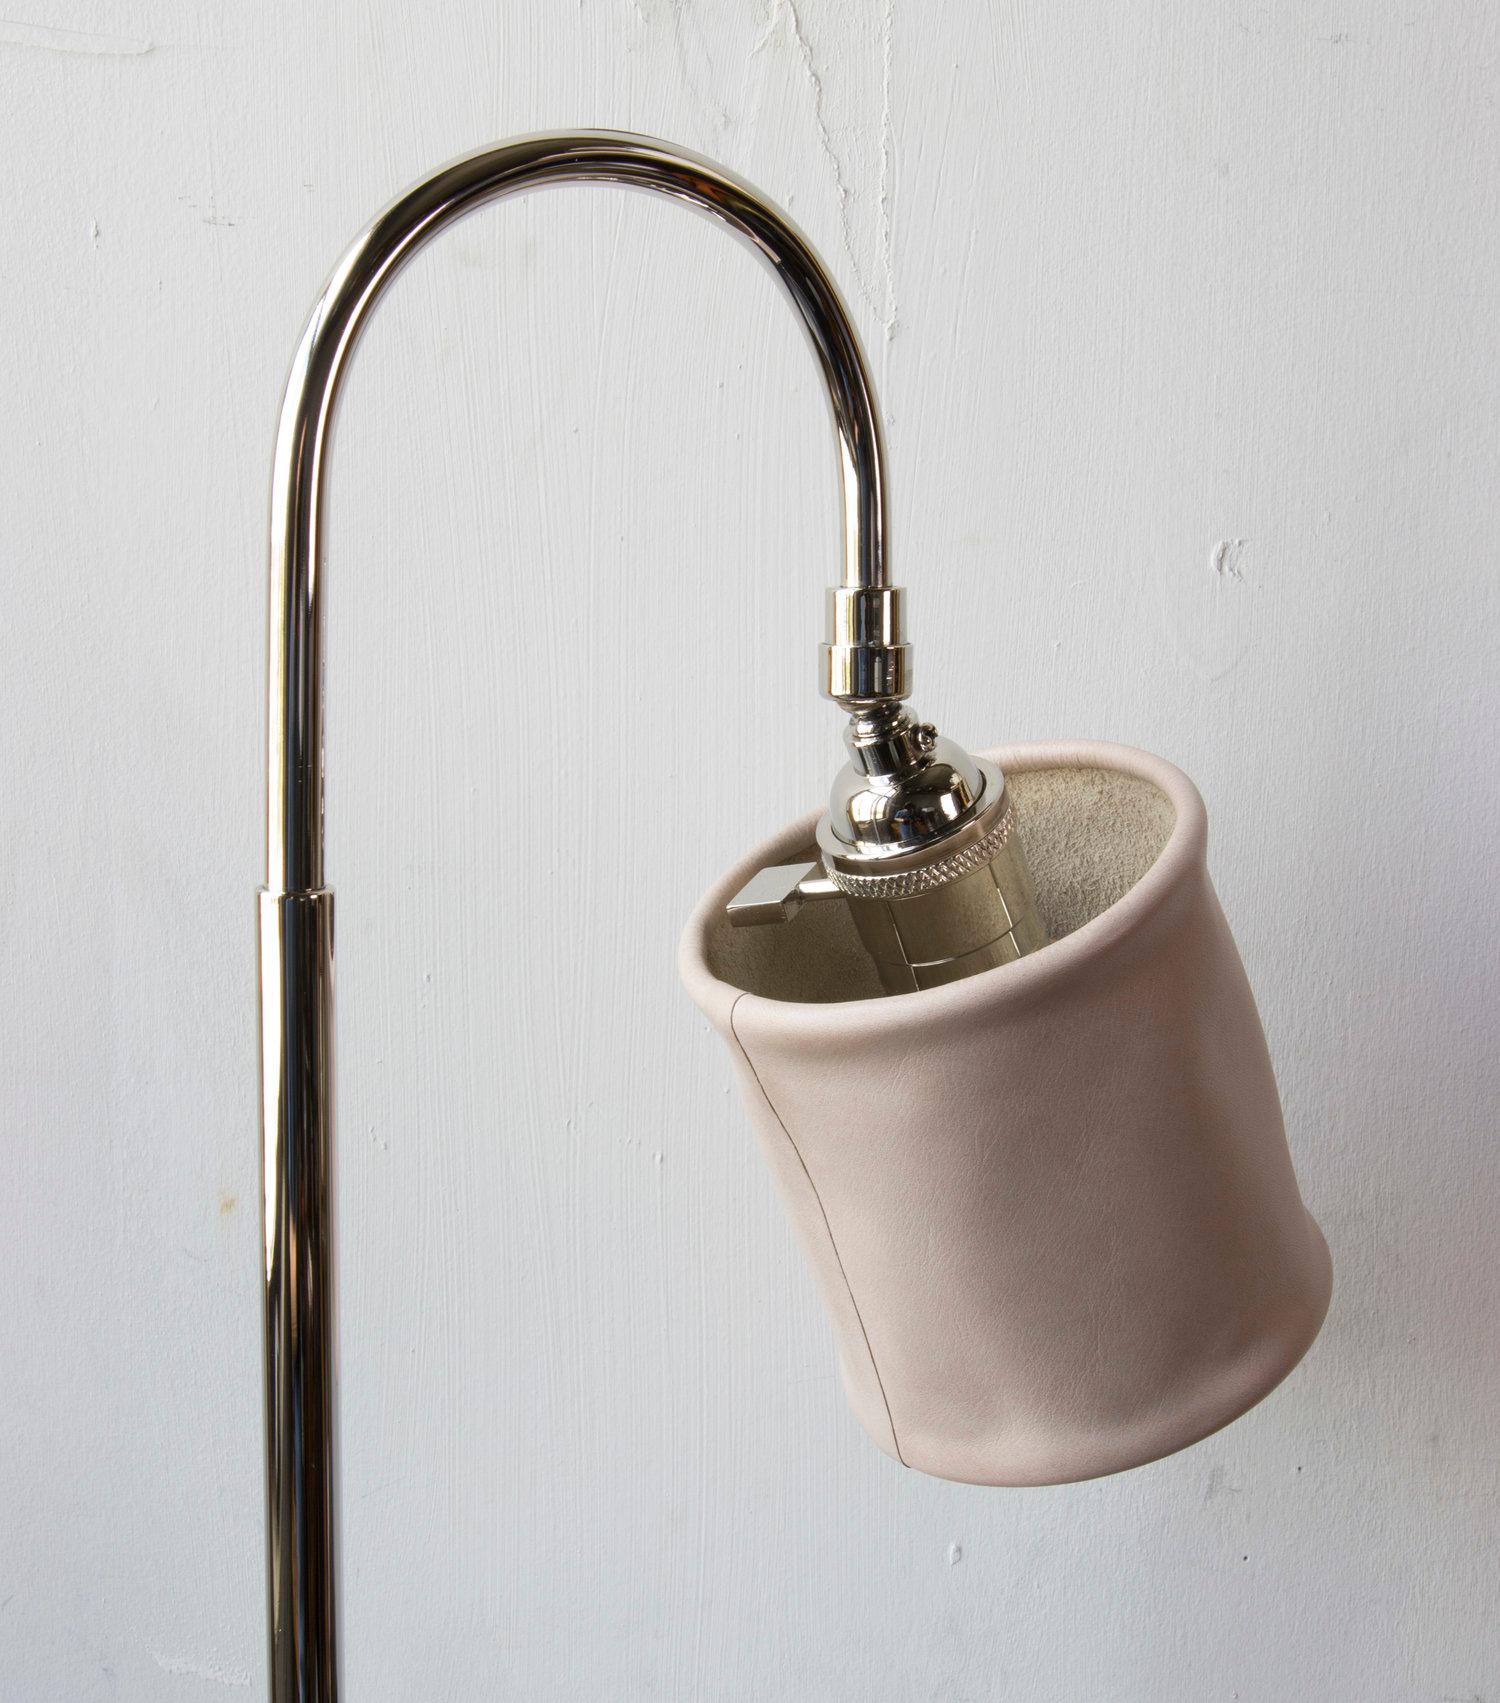 American Series01 Desk Lamp, Hand-Dyed Blush 'Pink' Leather, Polished Nickel-Plated Brass For Sale